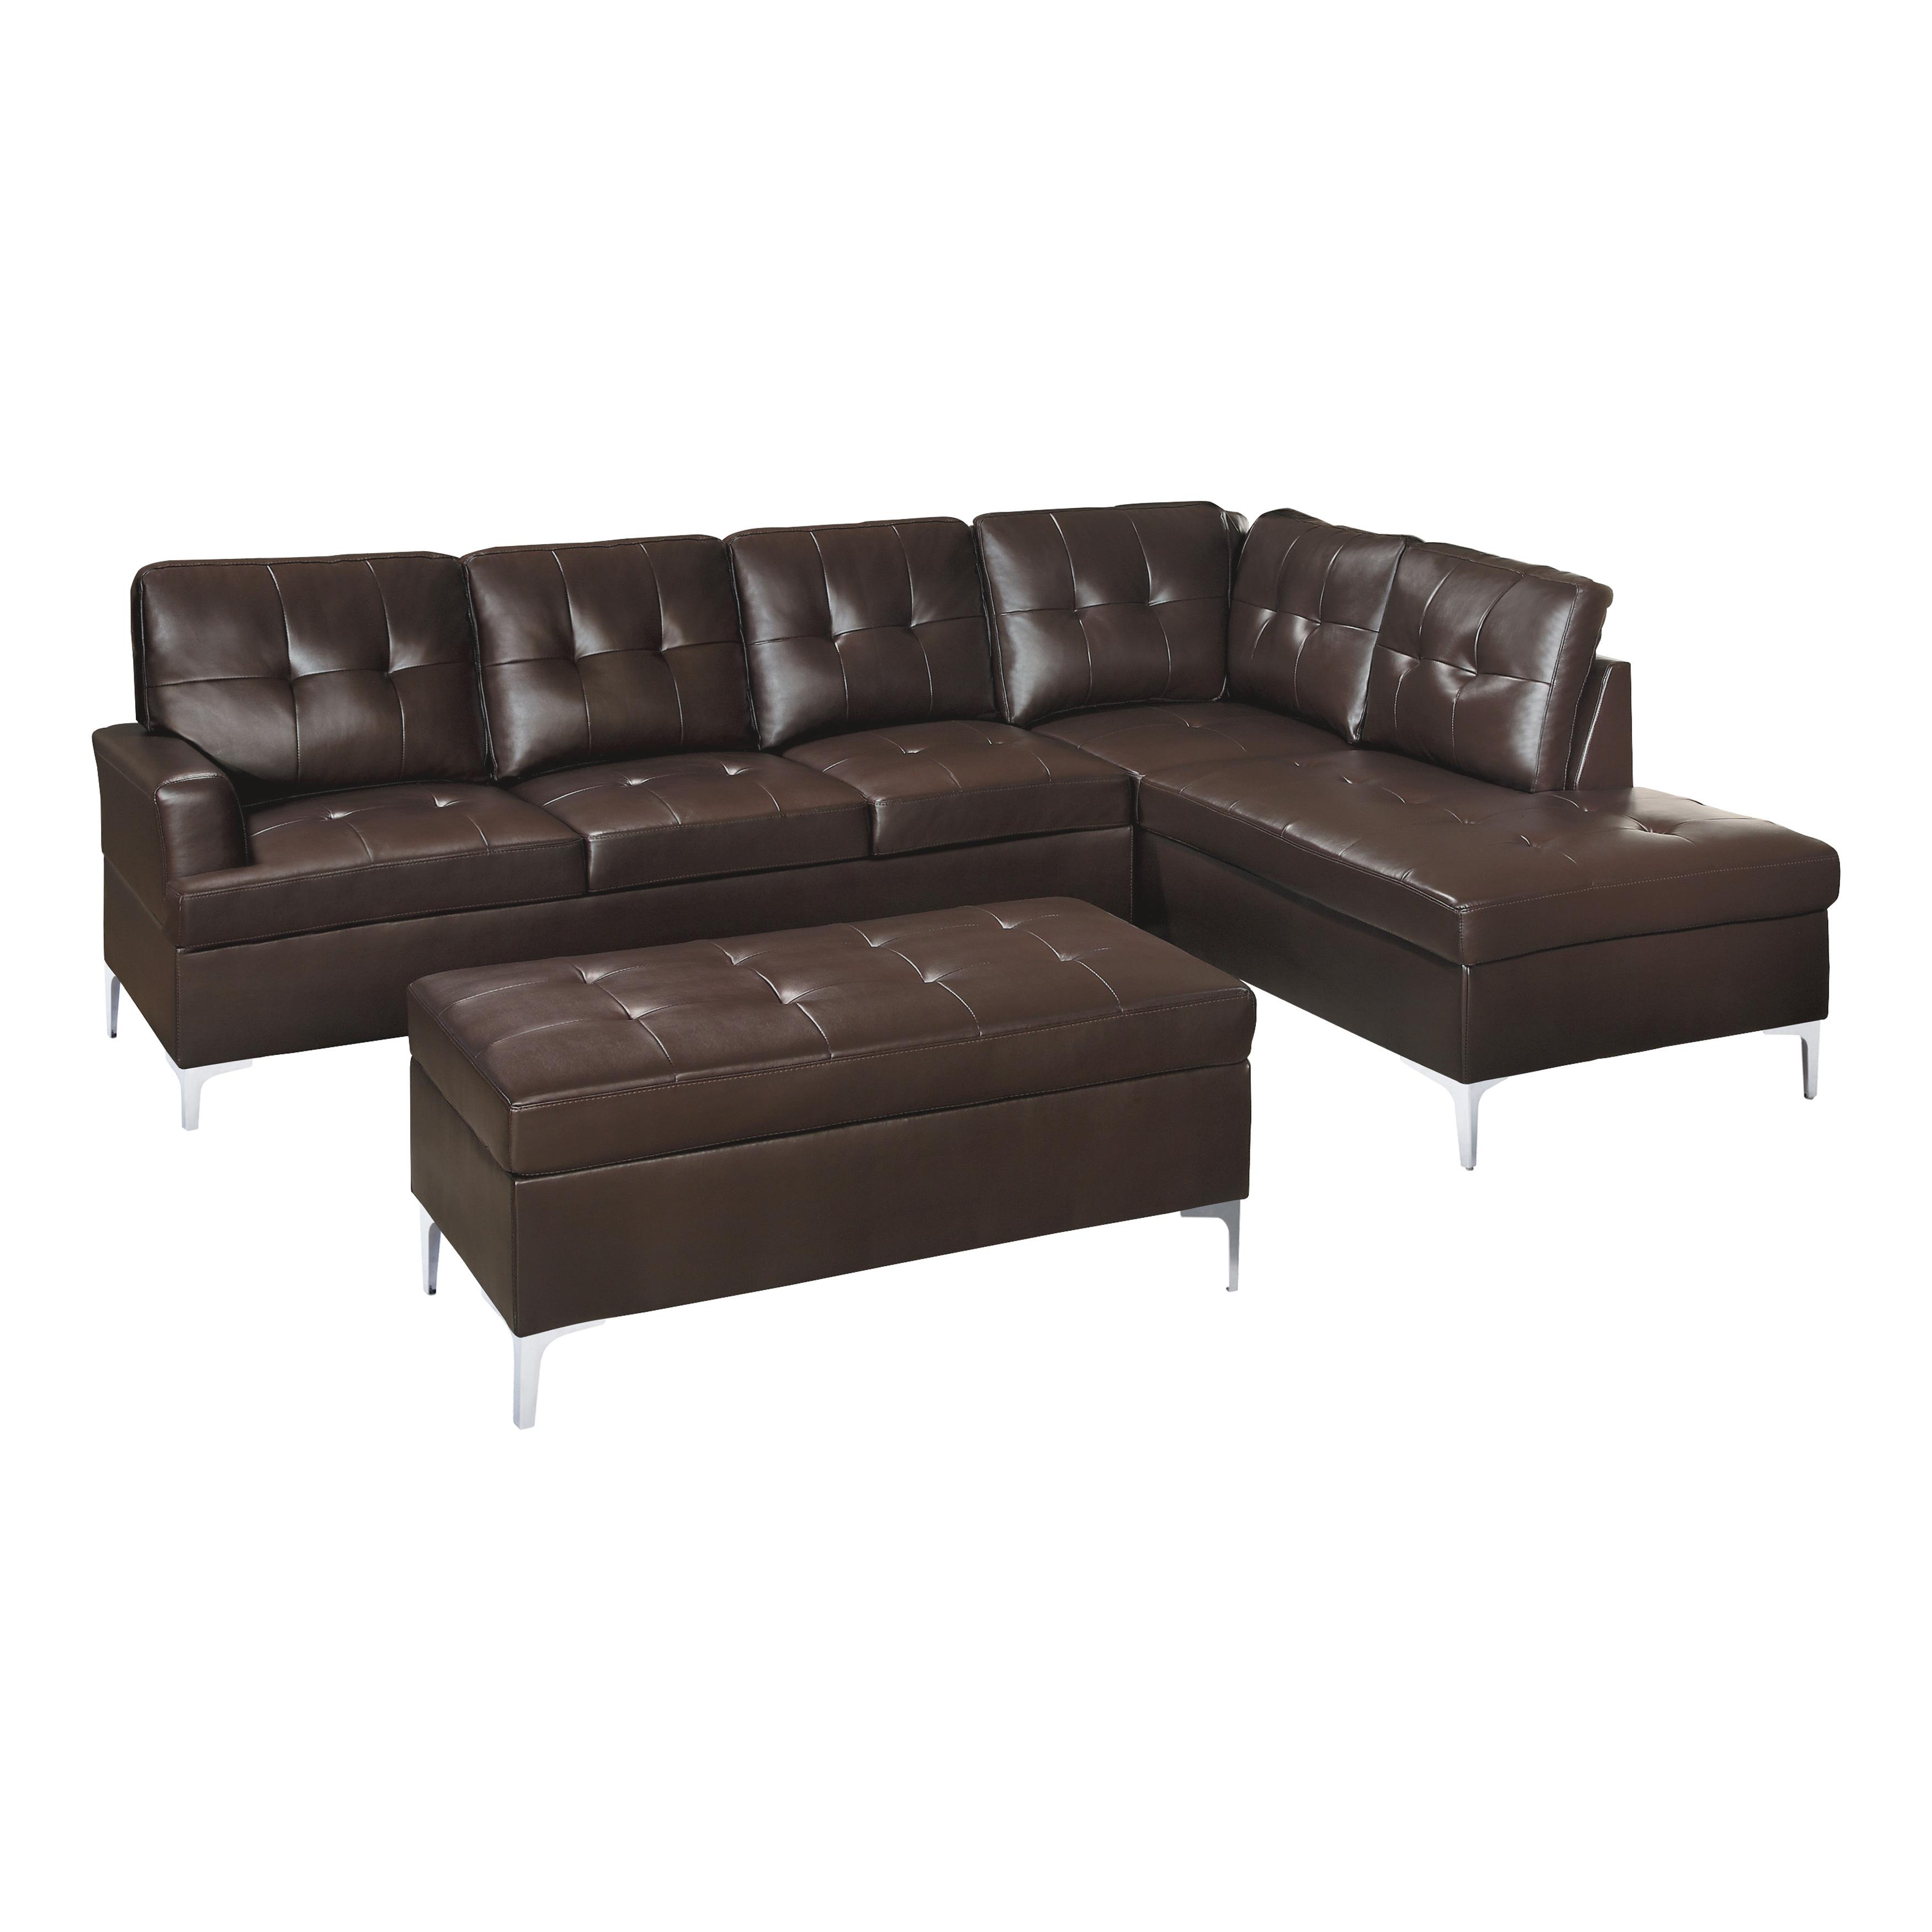 Contemporary Sectional w/ Ottoman 8378BRW*3 Barrington 8378BRW*3 in Brown Faux Leather